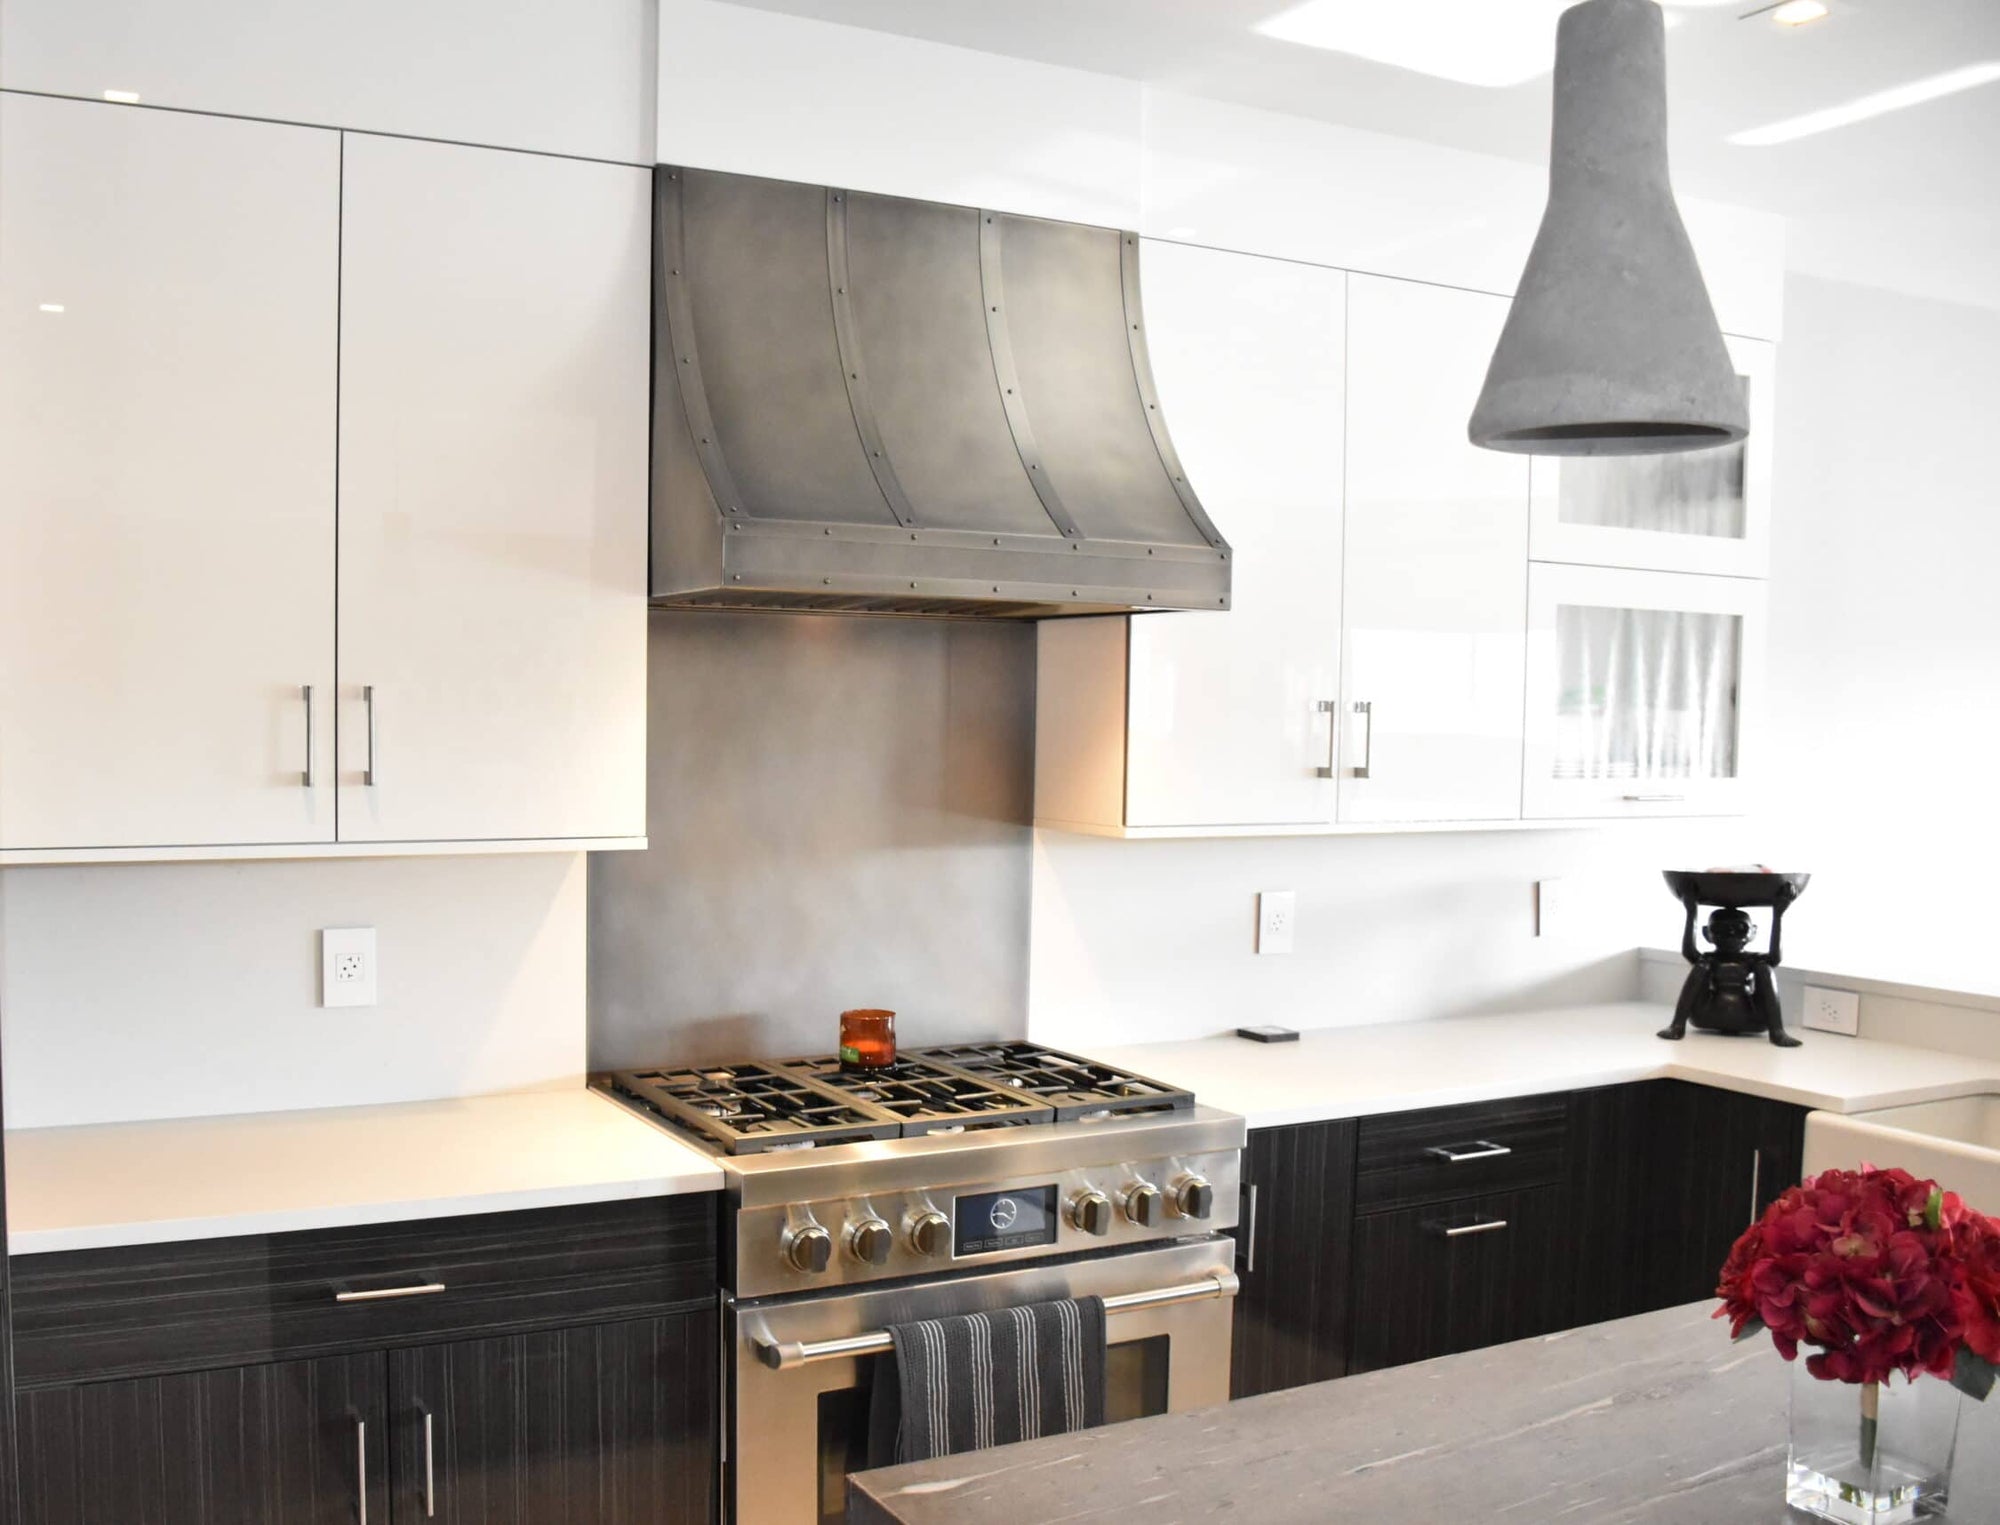 How Much Does A Custom Range Hood Cost?